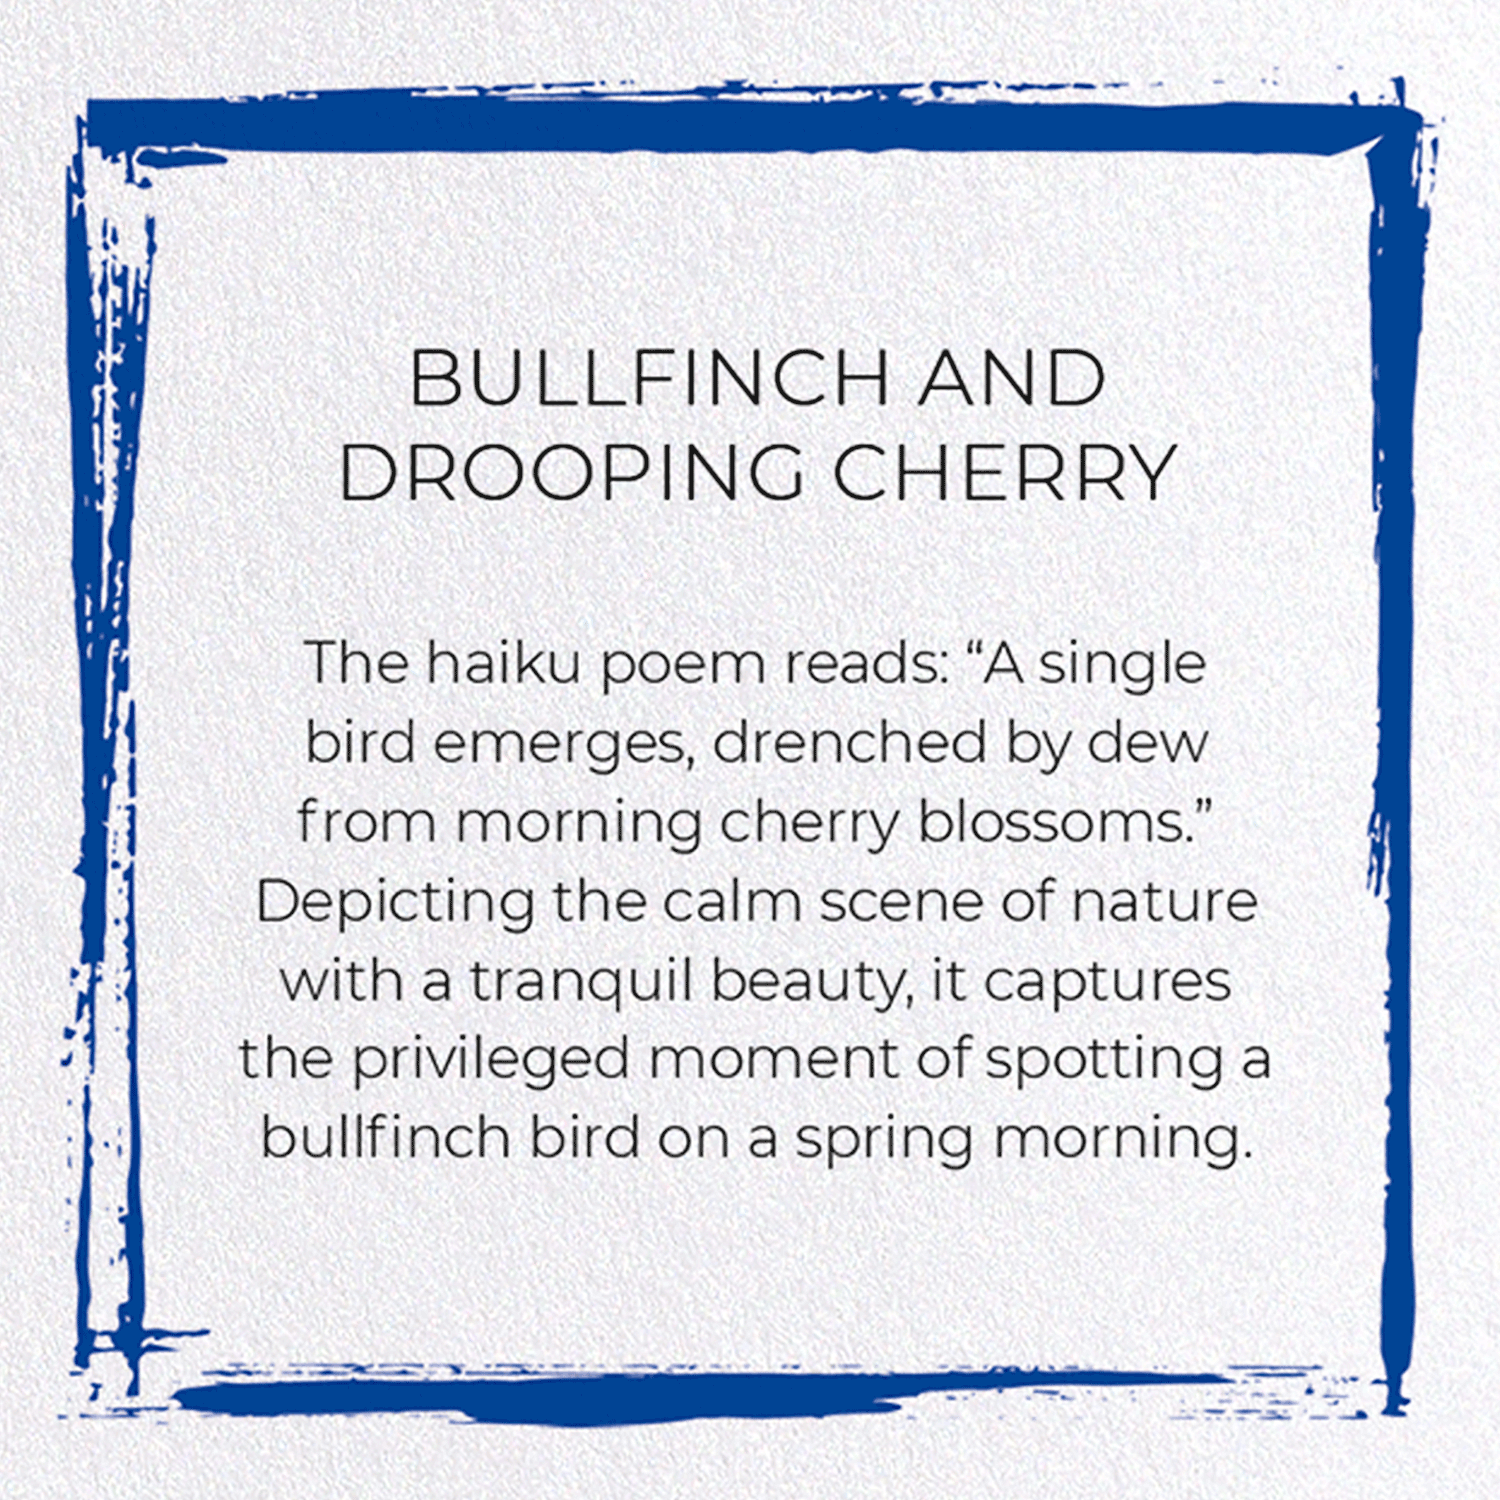 BULLFINCH AND DROOPING CHERRY